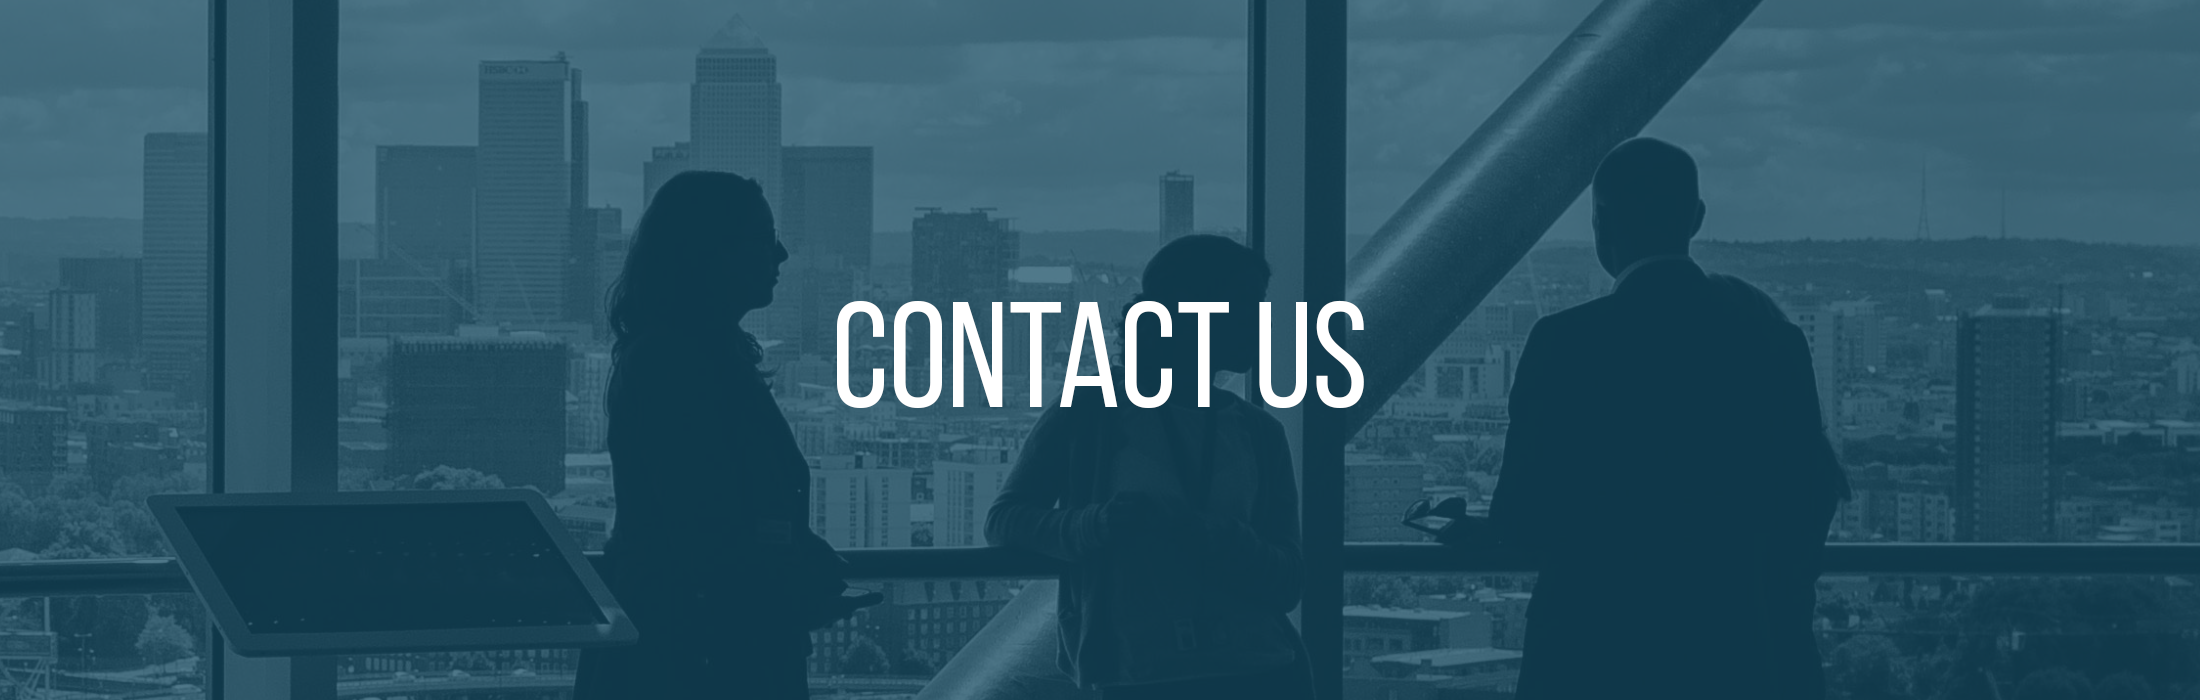 contact-us-banner